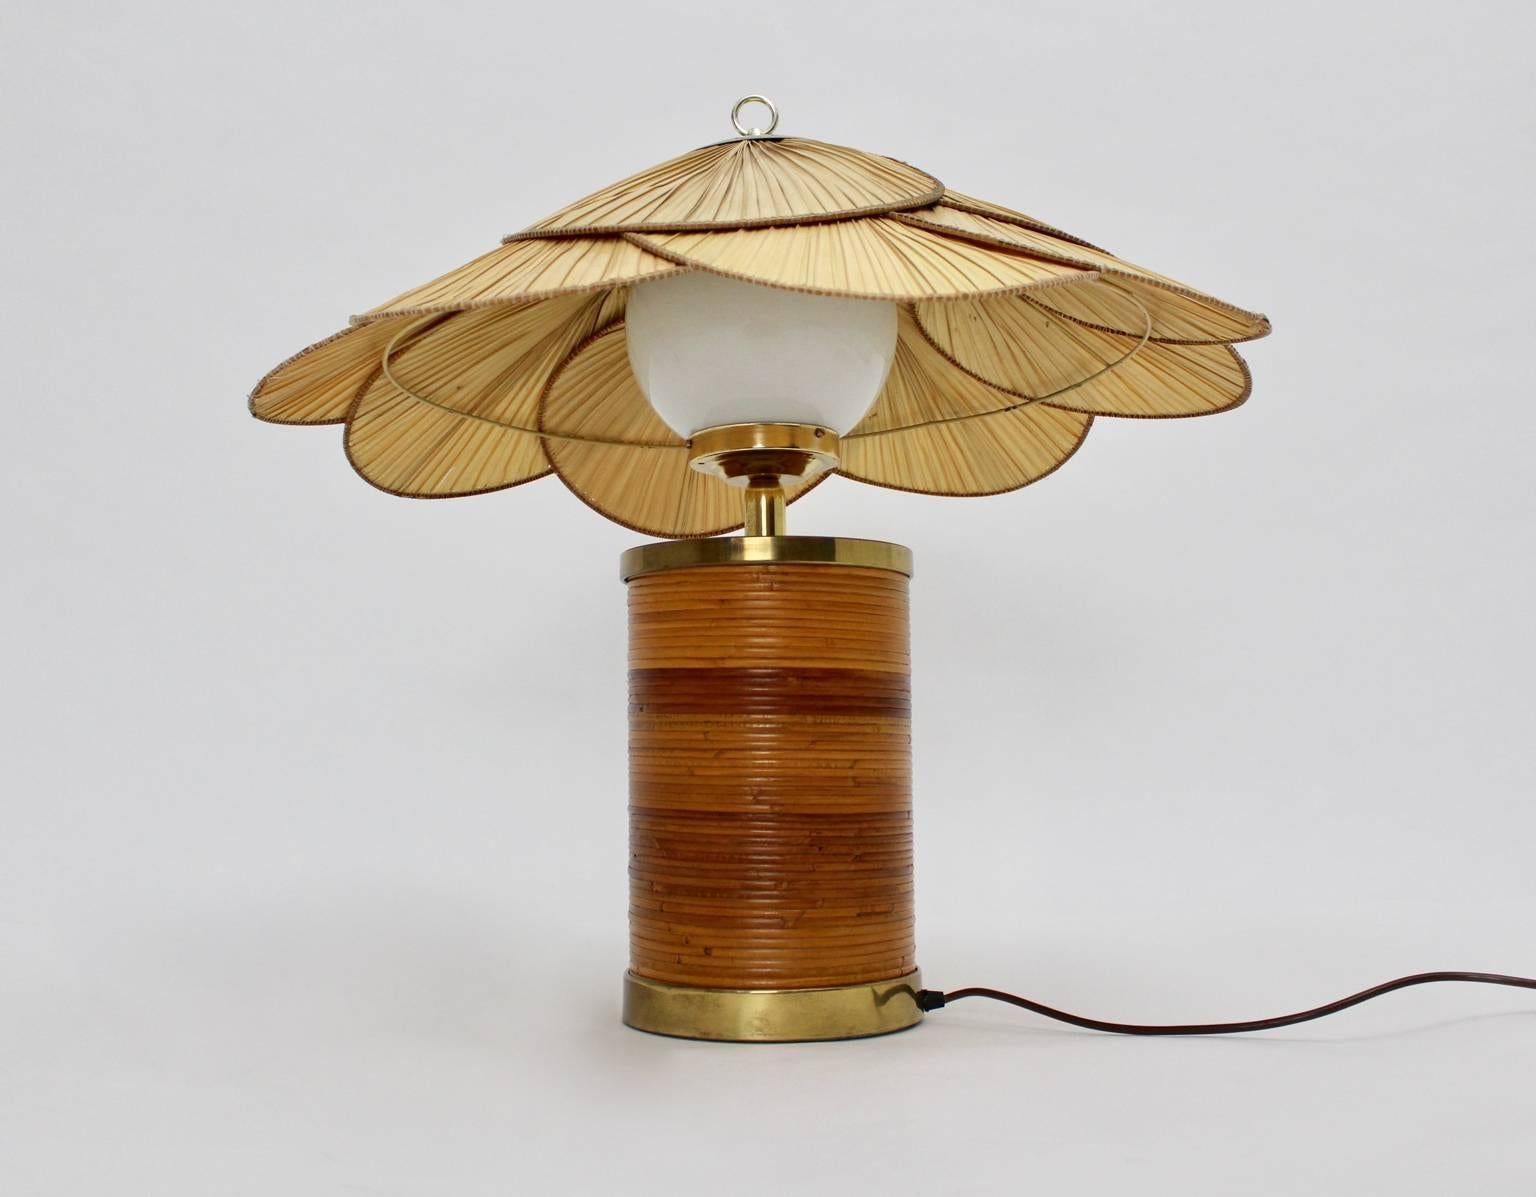 This table lamp was designed by Ingo Maurer, 1970s.
The materials are rattan, brass, an opal glass ball and exotic leaves.

The base is in very good condition with very minor signs of age.
The lampshade was made of exotic leaves, which show signs of